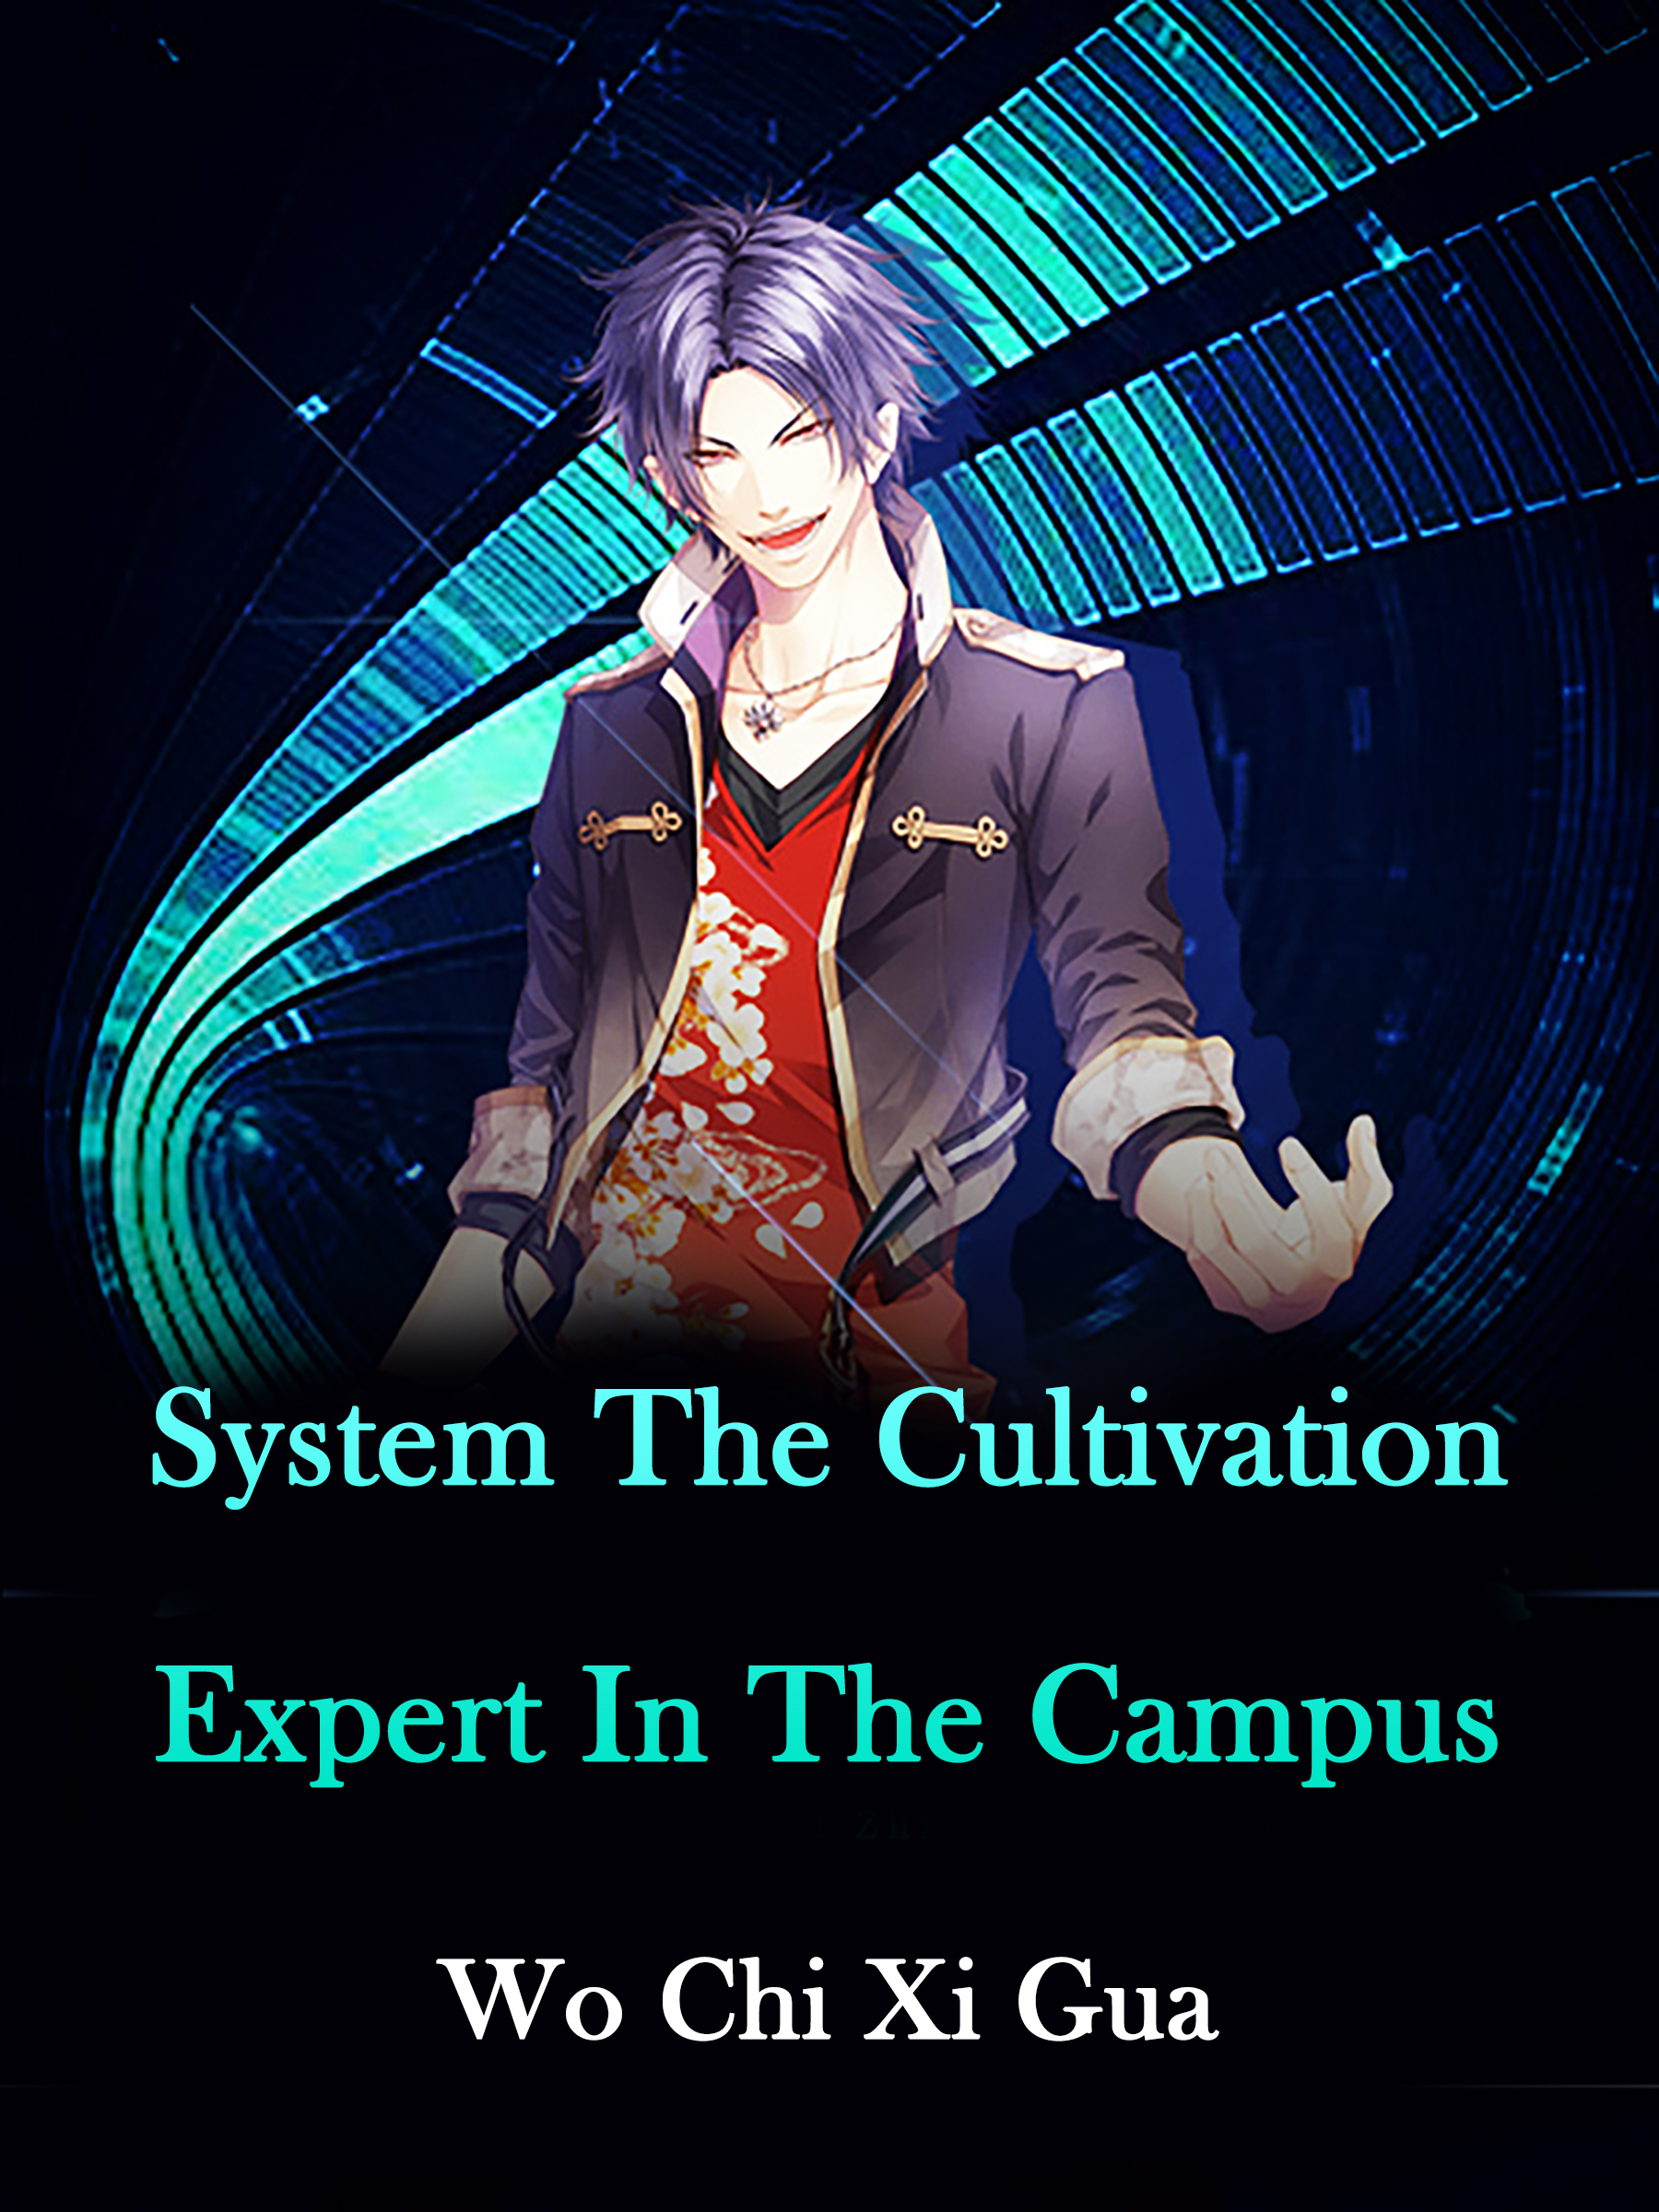 System: The Cultivation Expert In The Campus